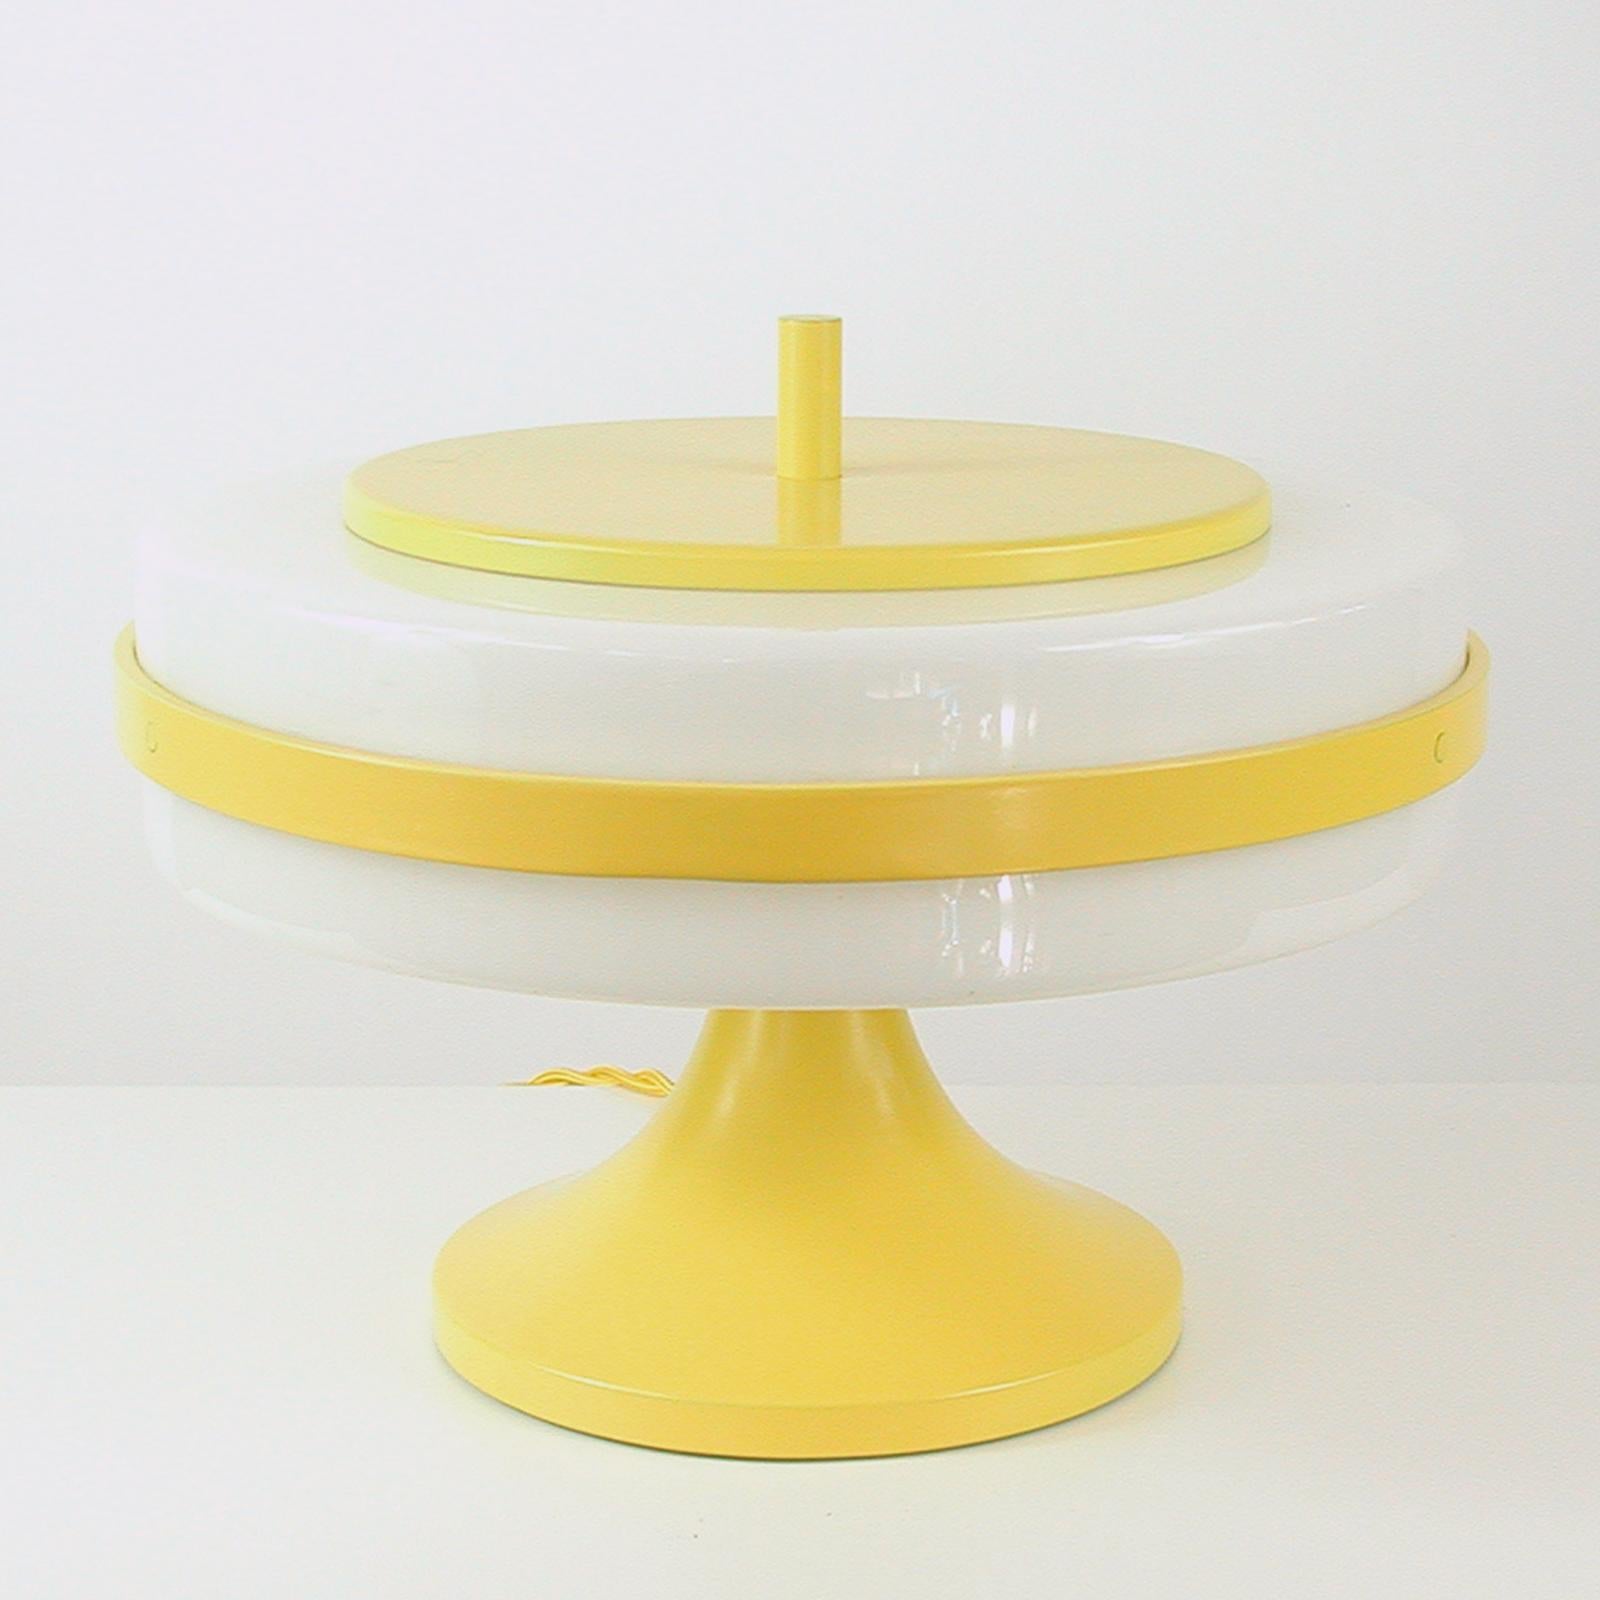 This extremely rare and unusual Stilux Milano Space Age Saturn table lamp was designed and manufactured in Italy in the late 1960s-early 1970s. The lamp features a tulip shaped base and a white Lucite (plastic) lamp shade with yellow lacquered